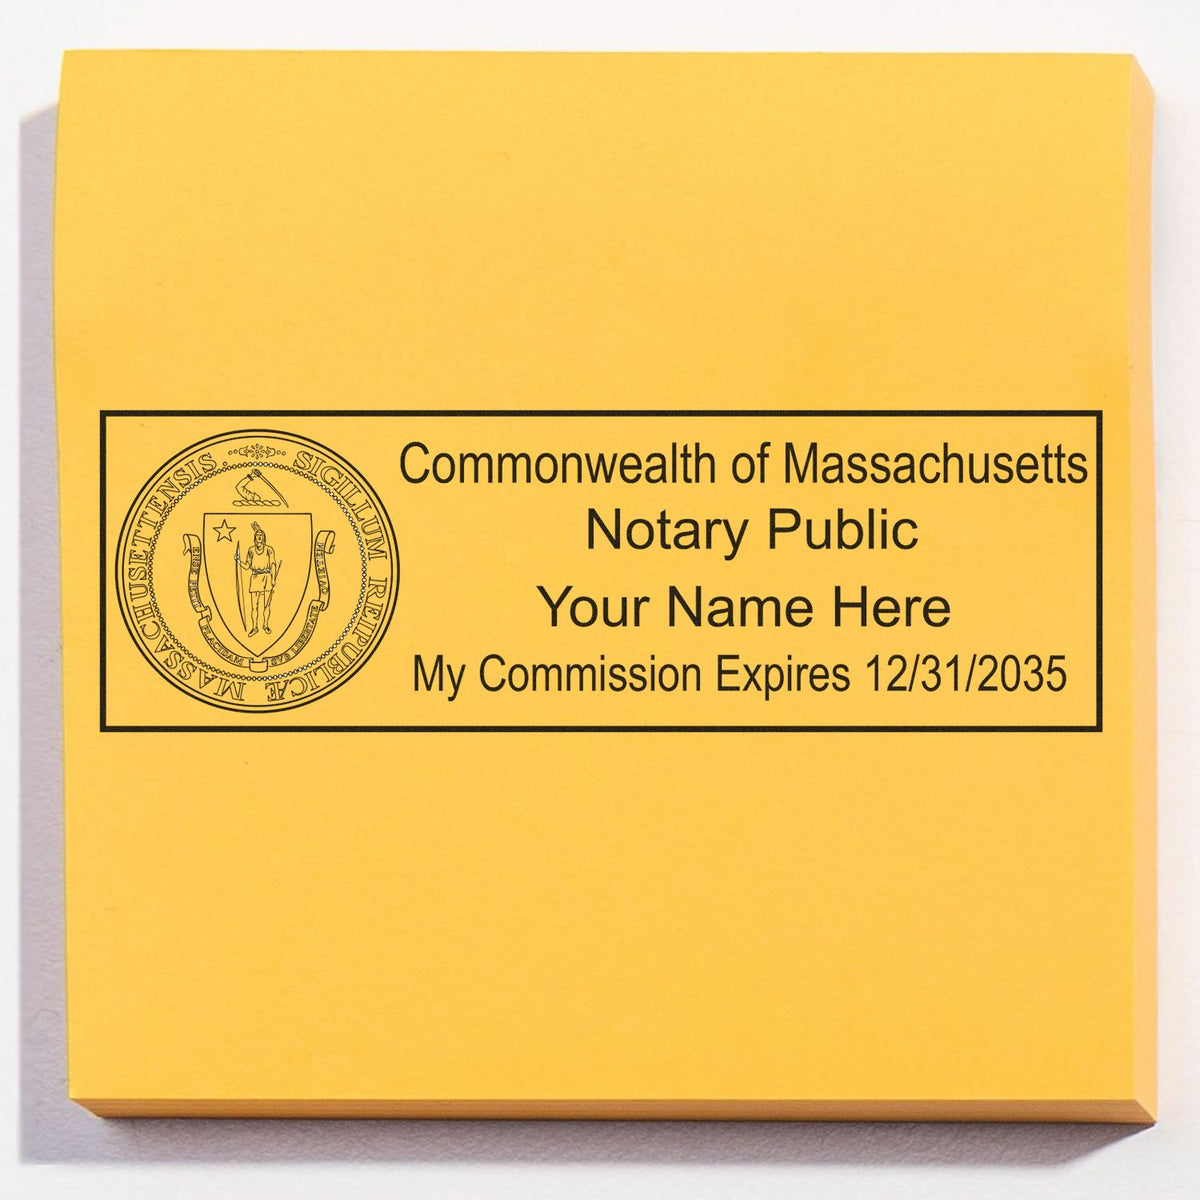 This paper is stamped with a sample imprint of the Super Slim Massachusetts Notary Public Stamp, signifying its quality and reliability.